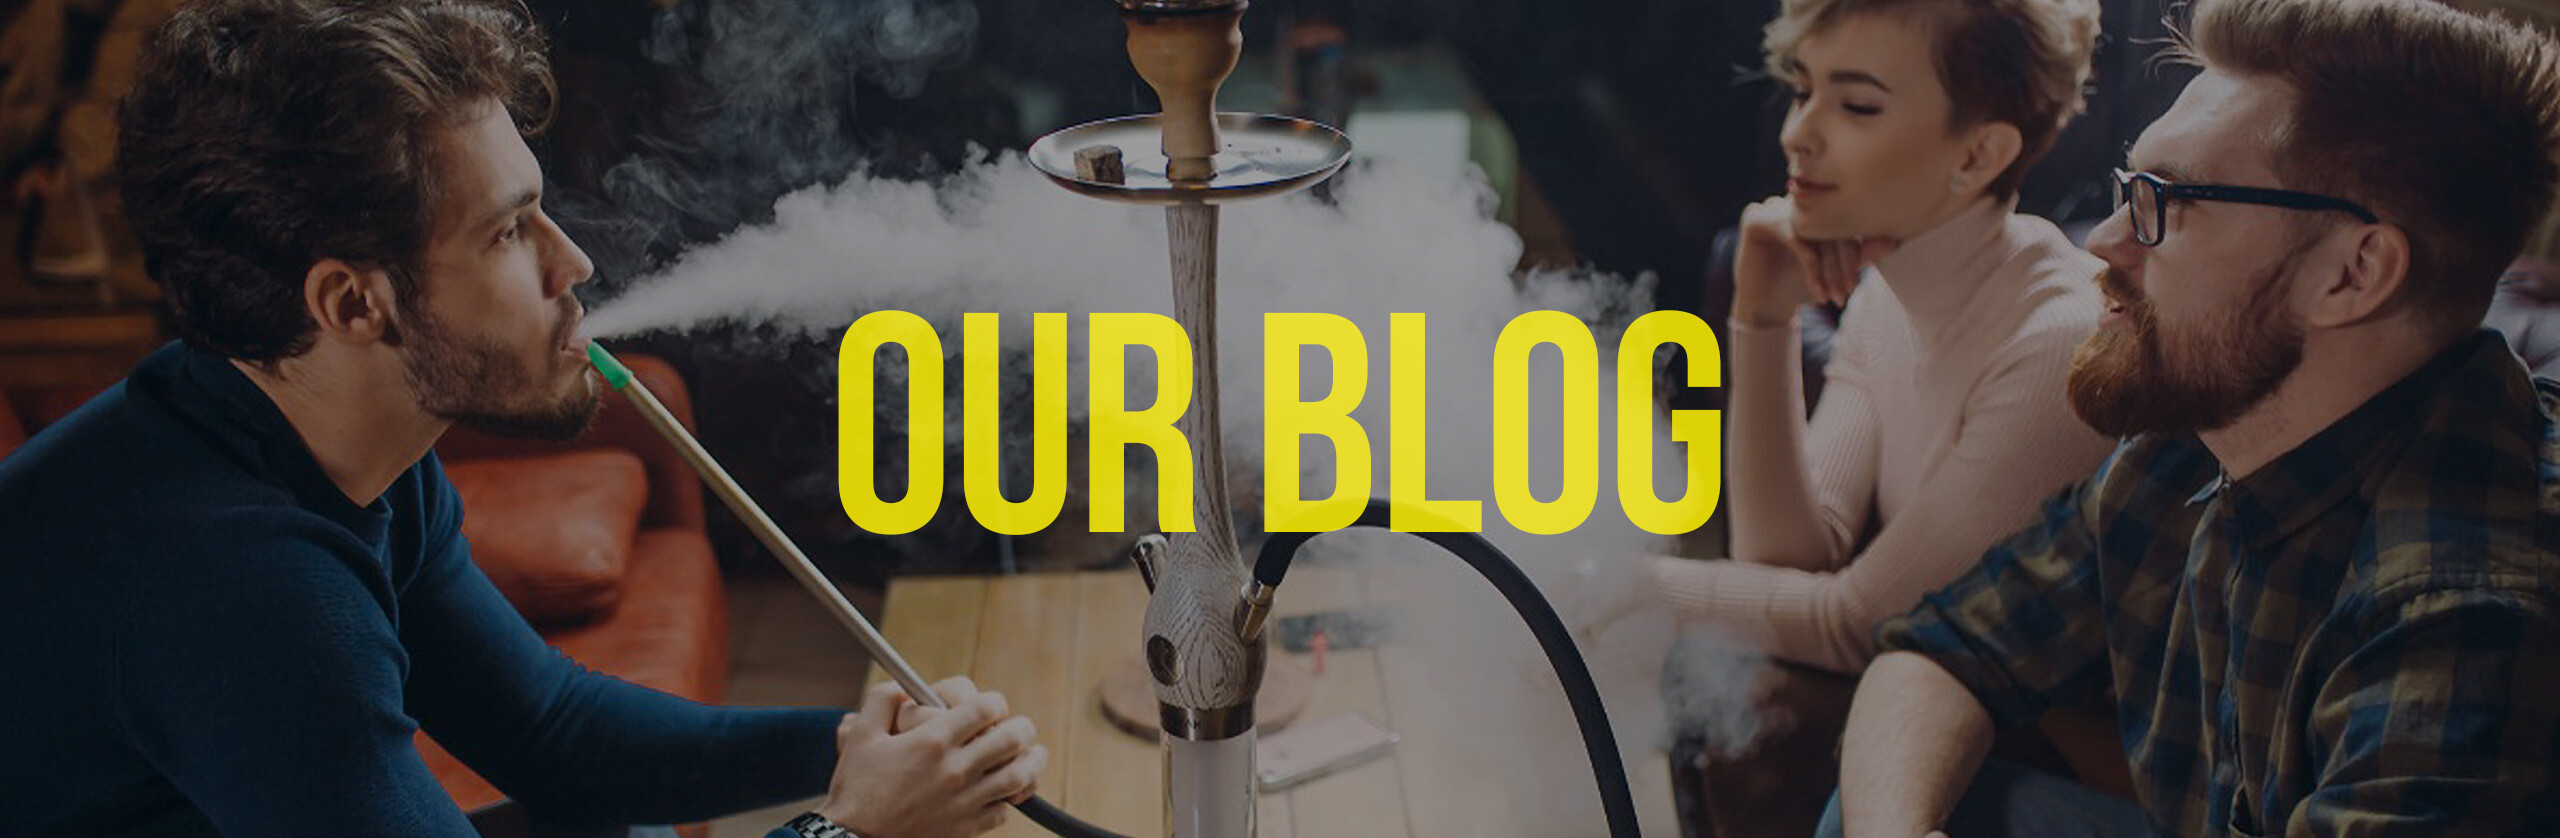 The Ultimate Guide To Different Hookah Accessories